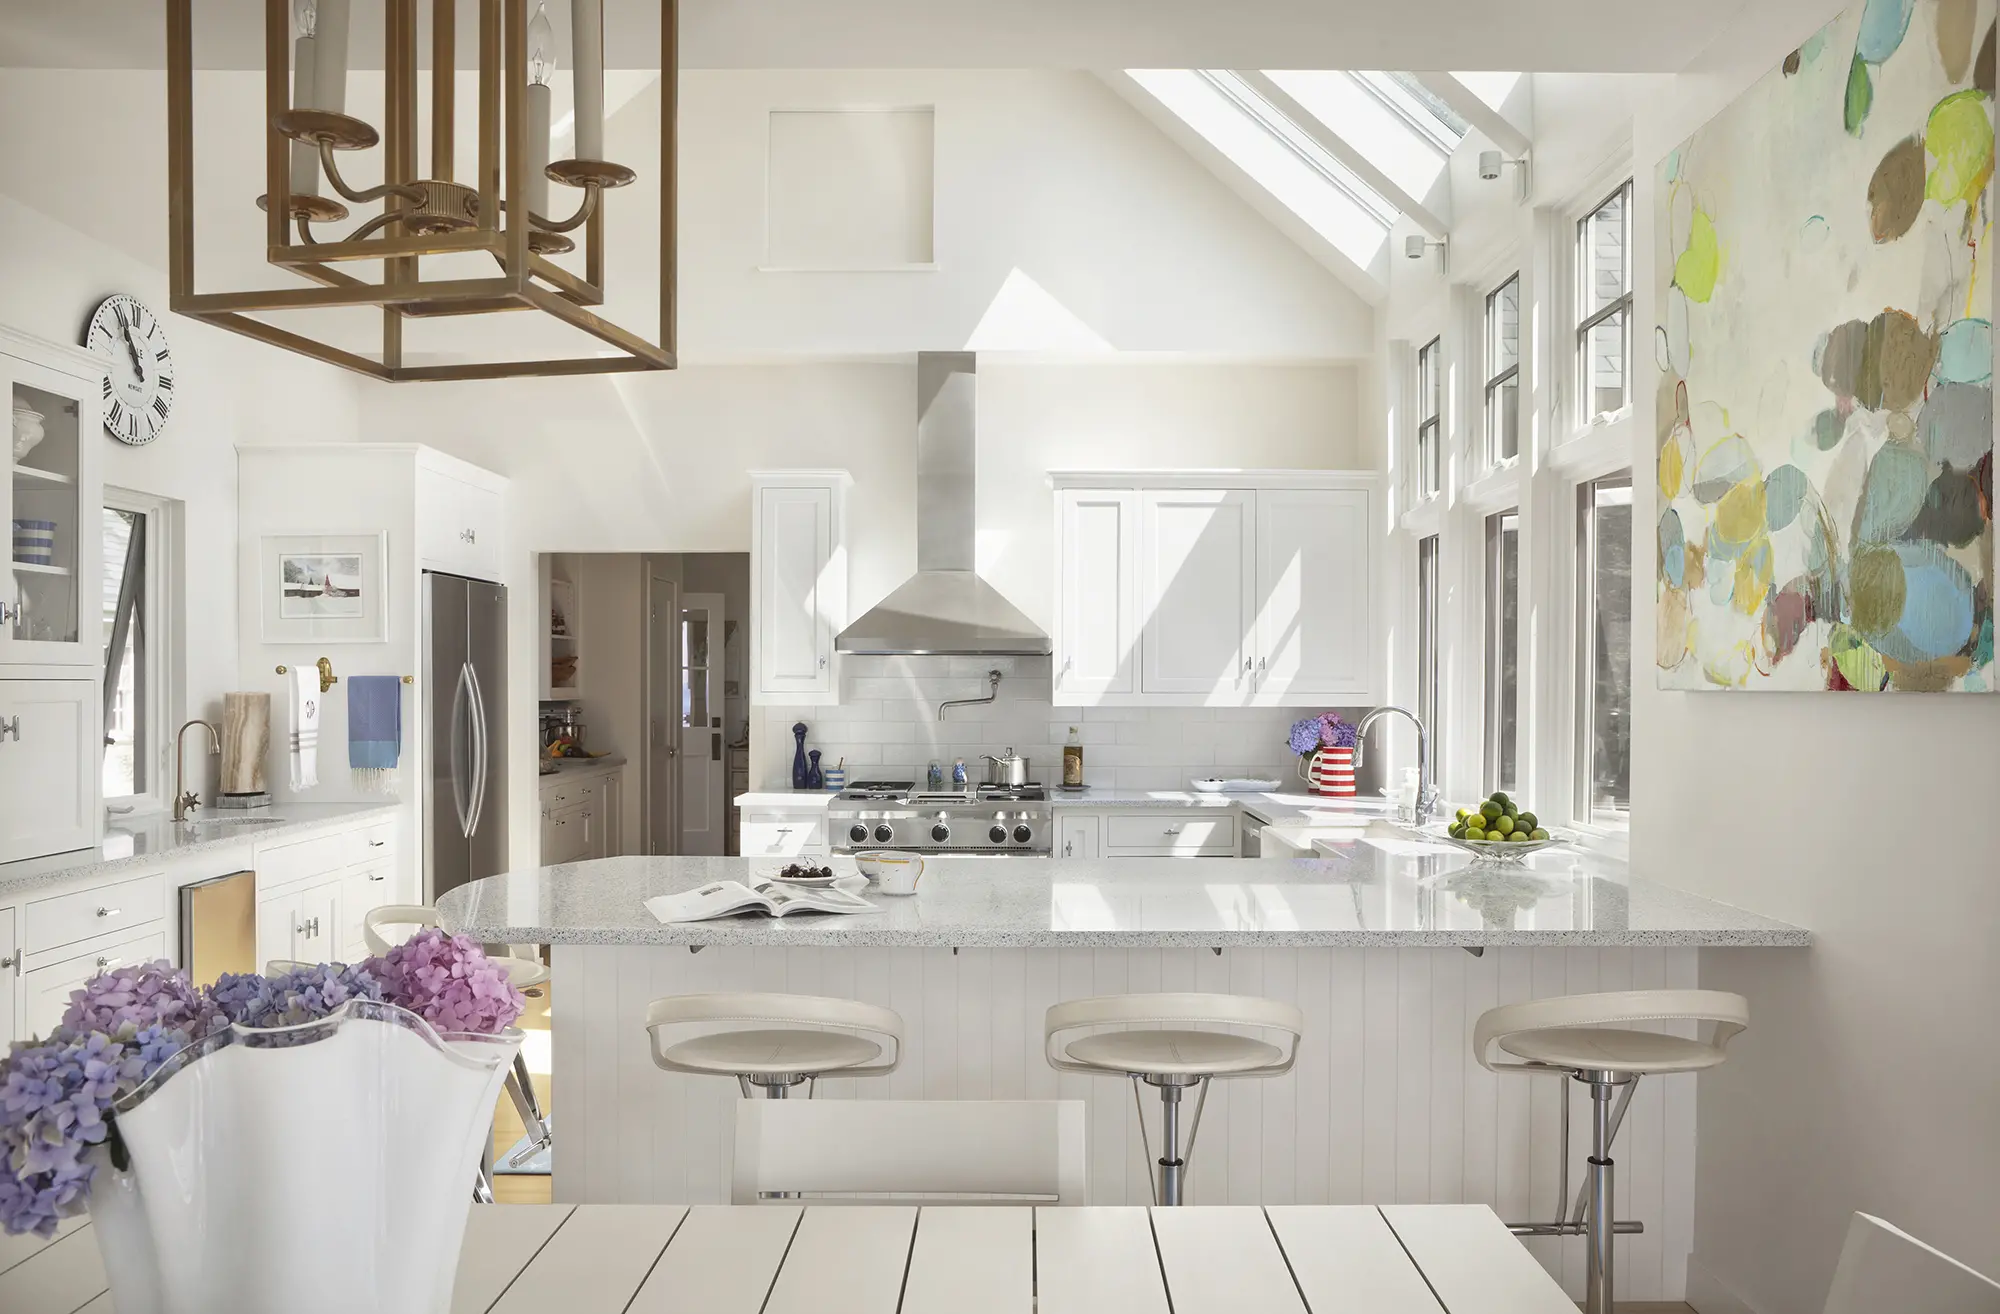 Bright white kitchen with floral accents, modern theme, and new appliances